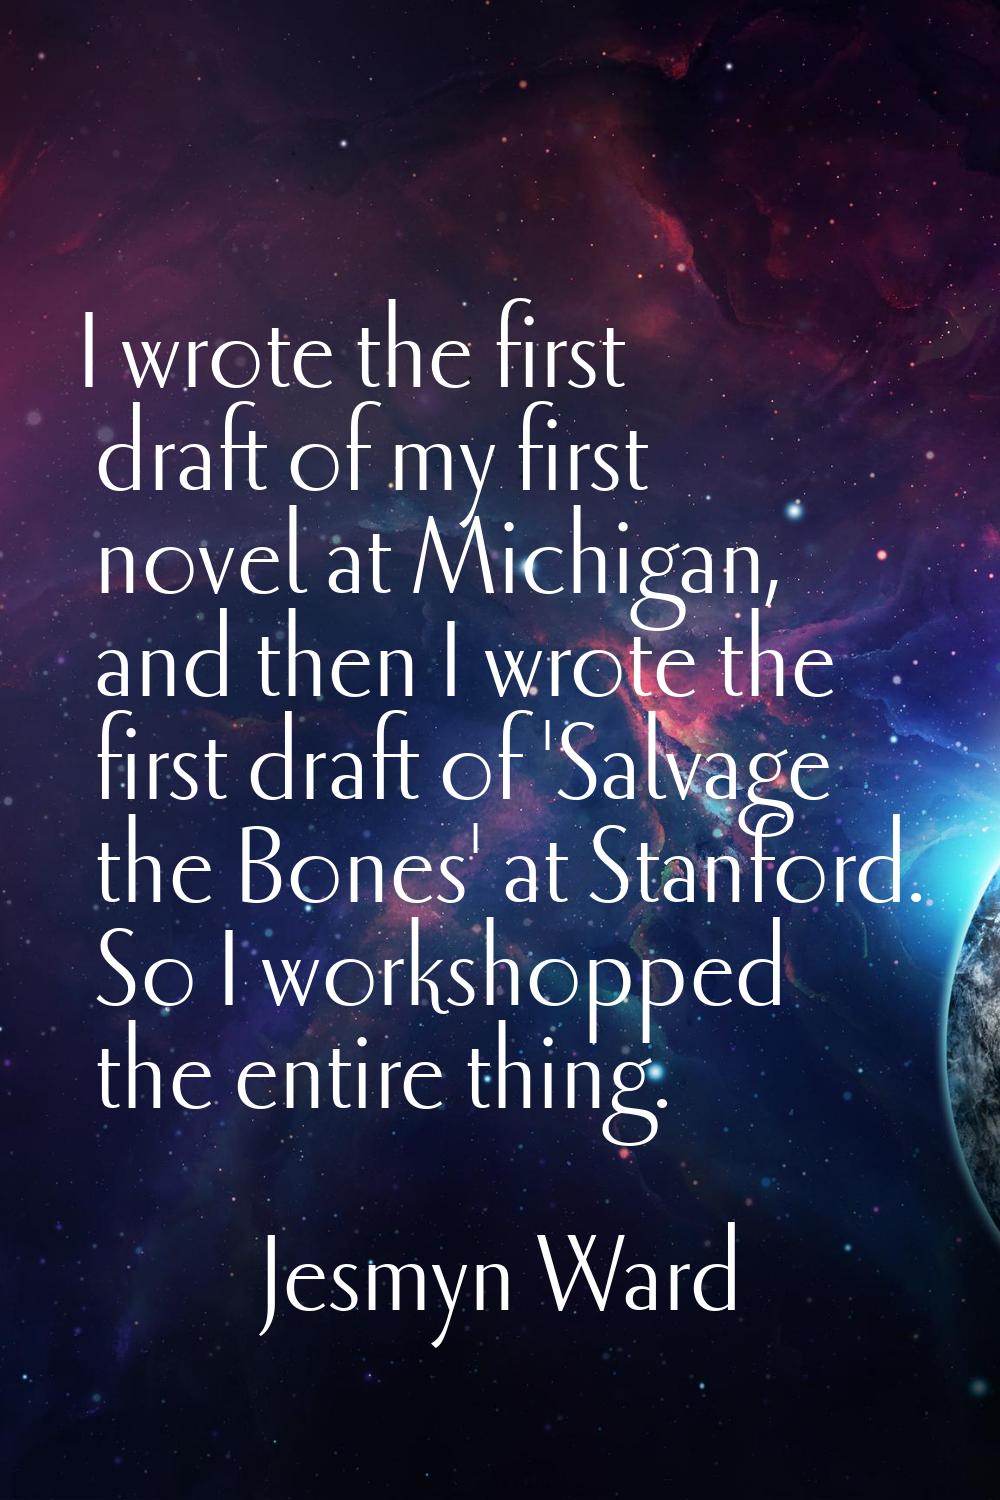 I wrote the first draft of my first novel at Michigan, and then I wrote the first draft of 'Salvage